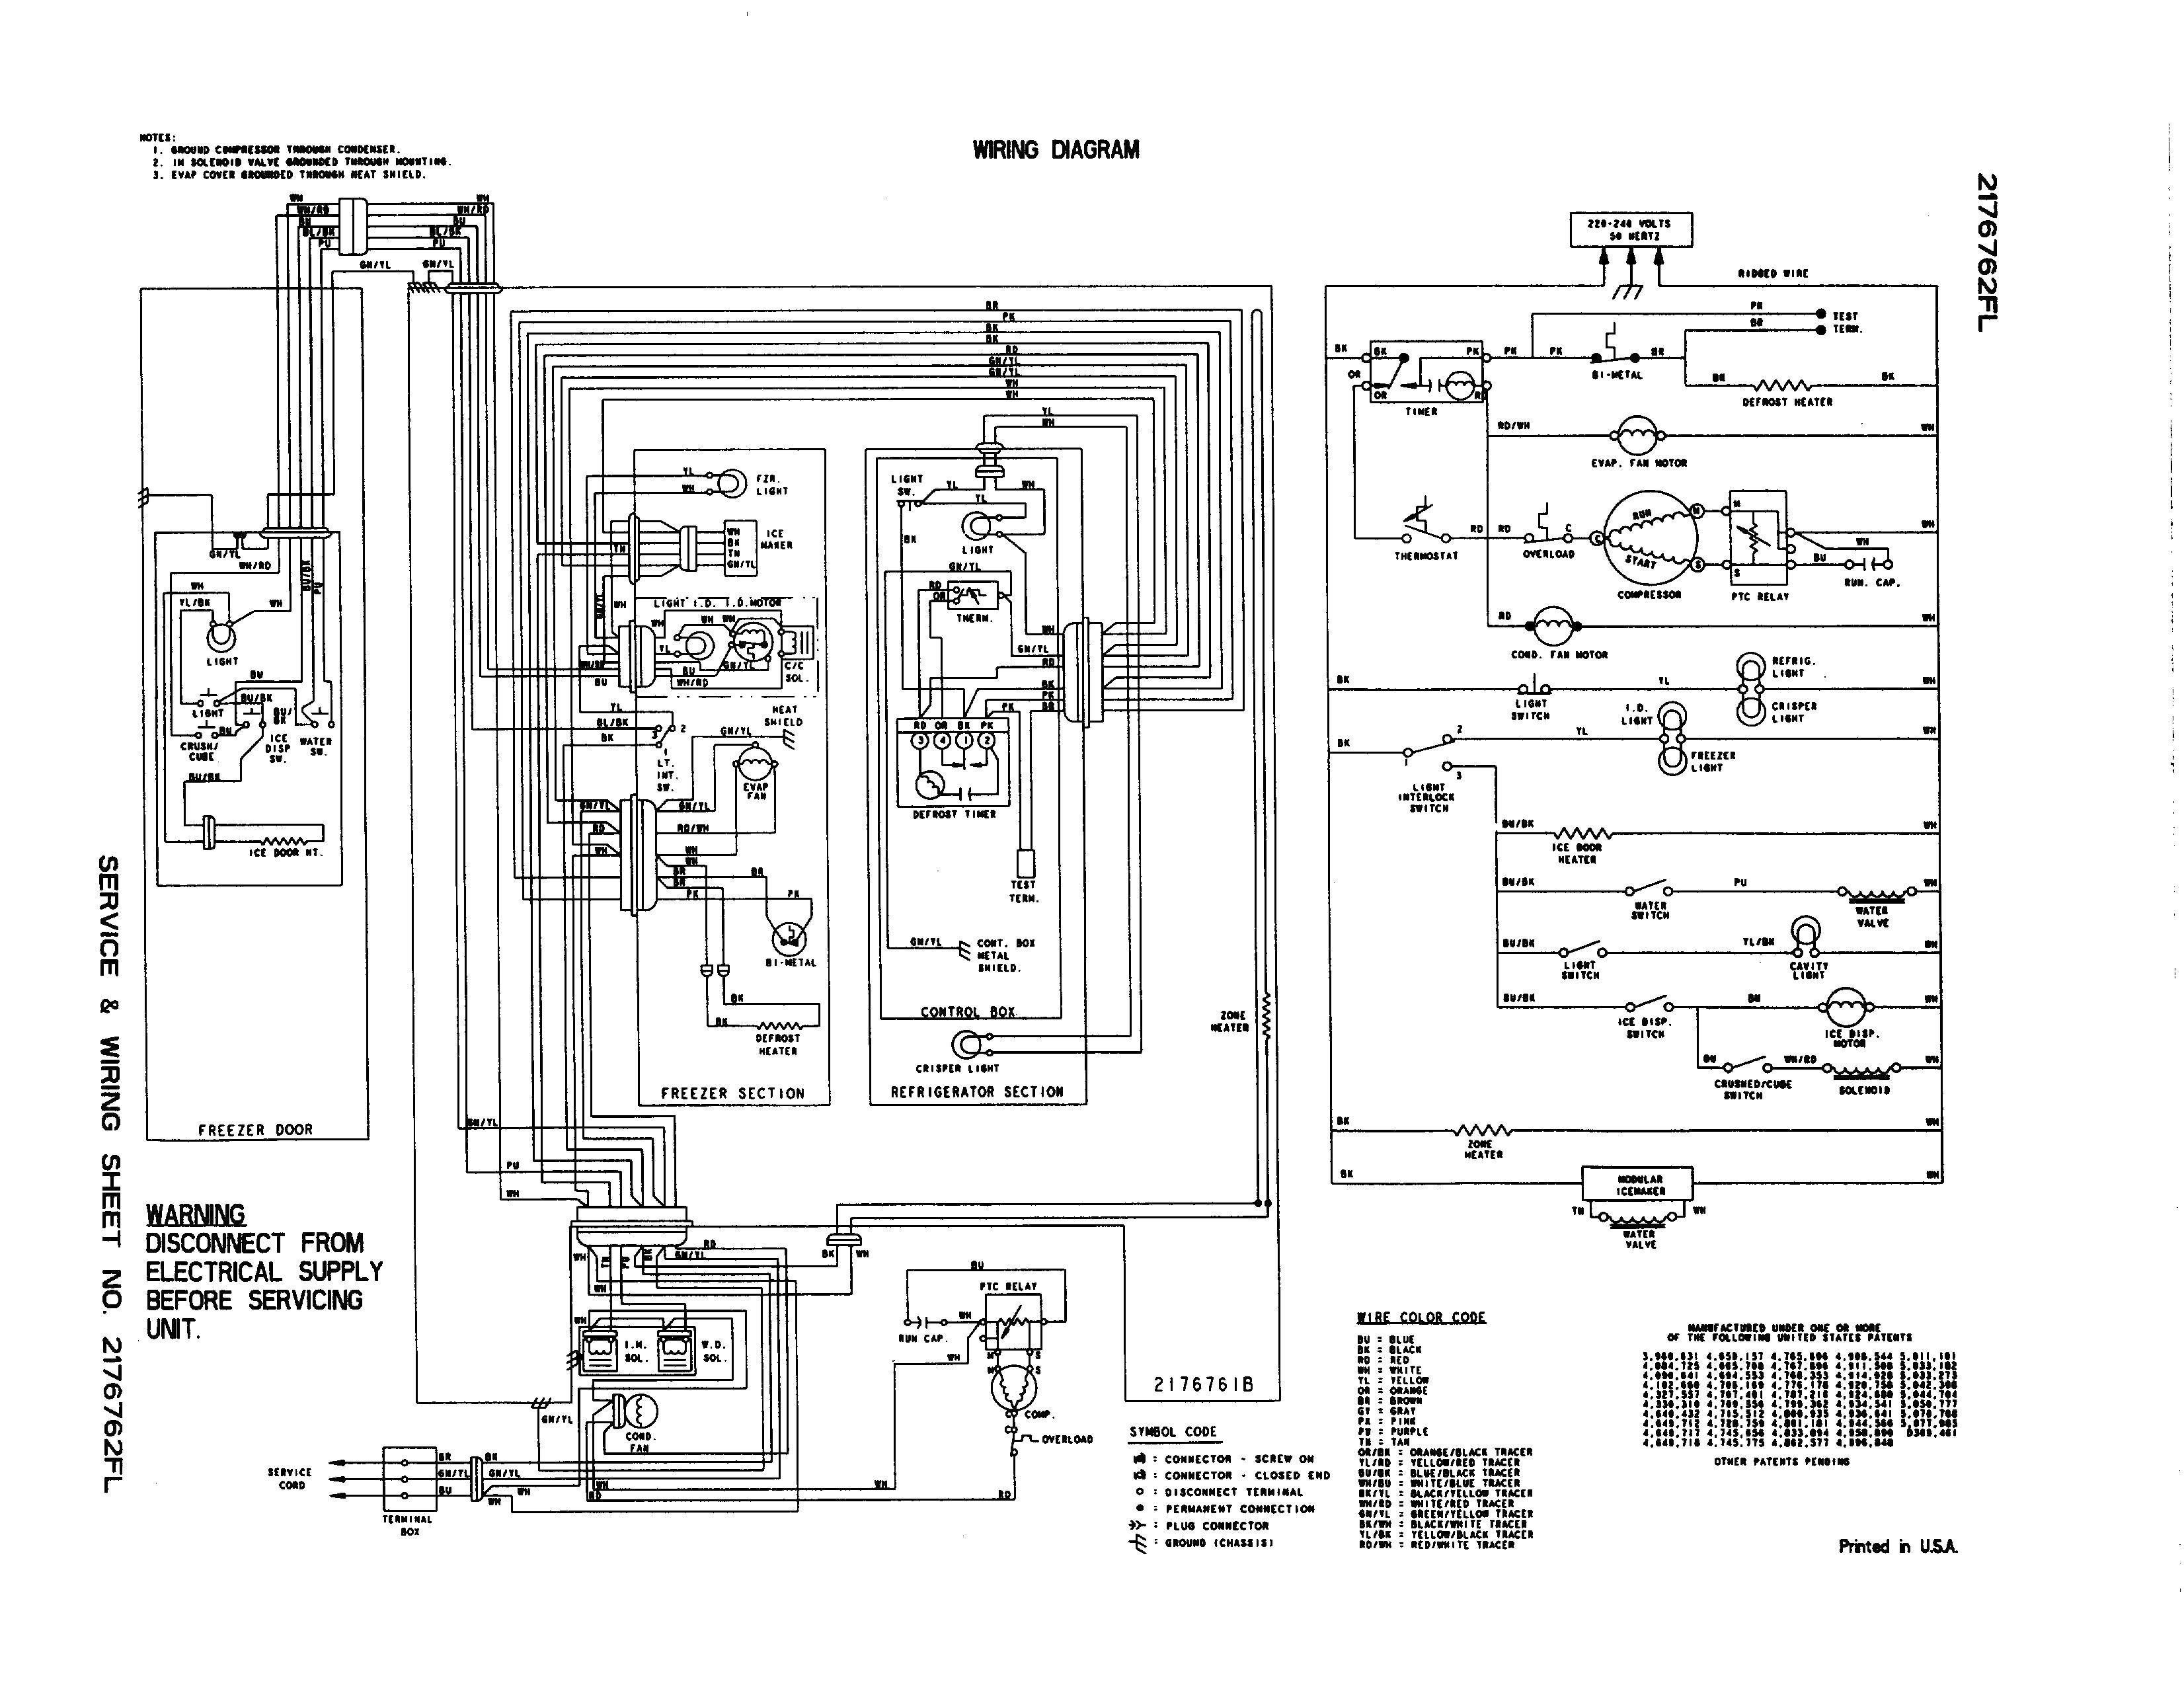 Whirlpool Refrigerator Wiring Diagram Electrical Schematic For Striking Kenmore Ice Maker And